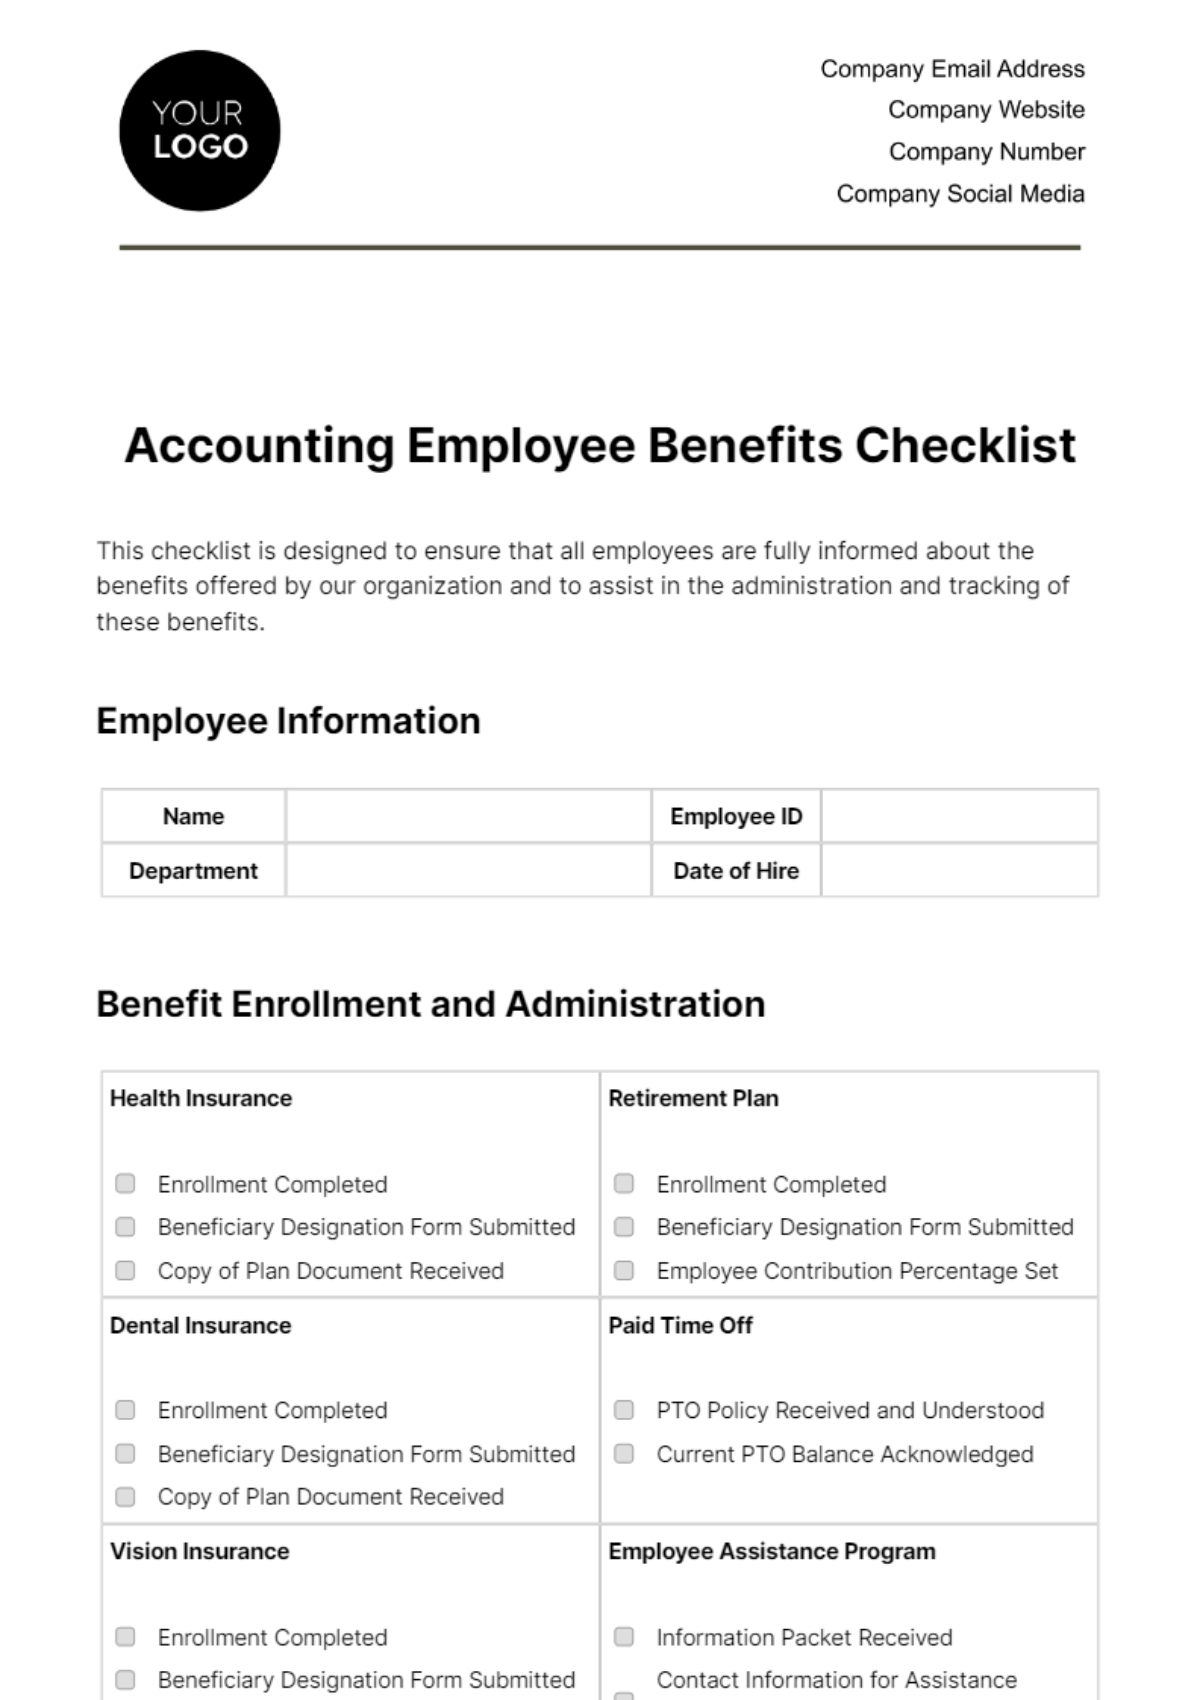 Free Accounting Employee Benefits Checklist Template